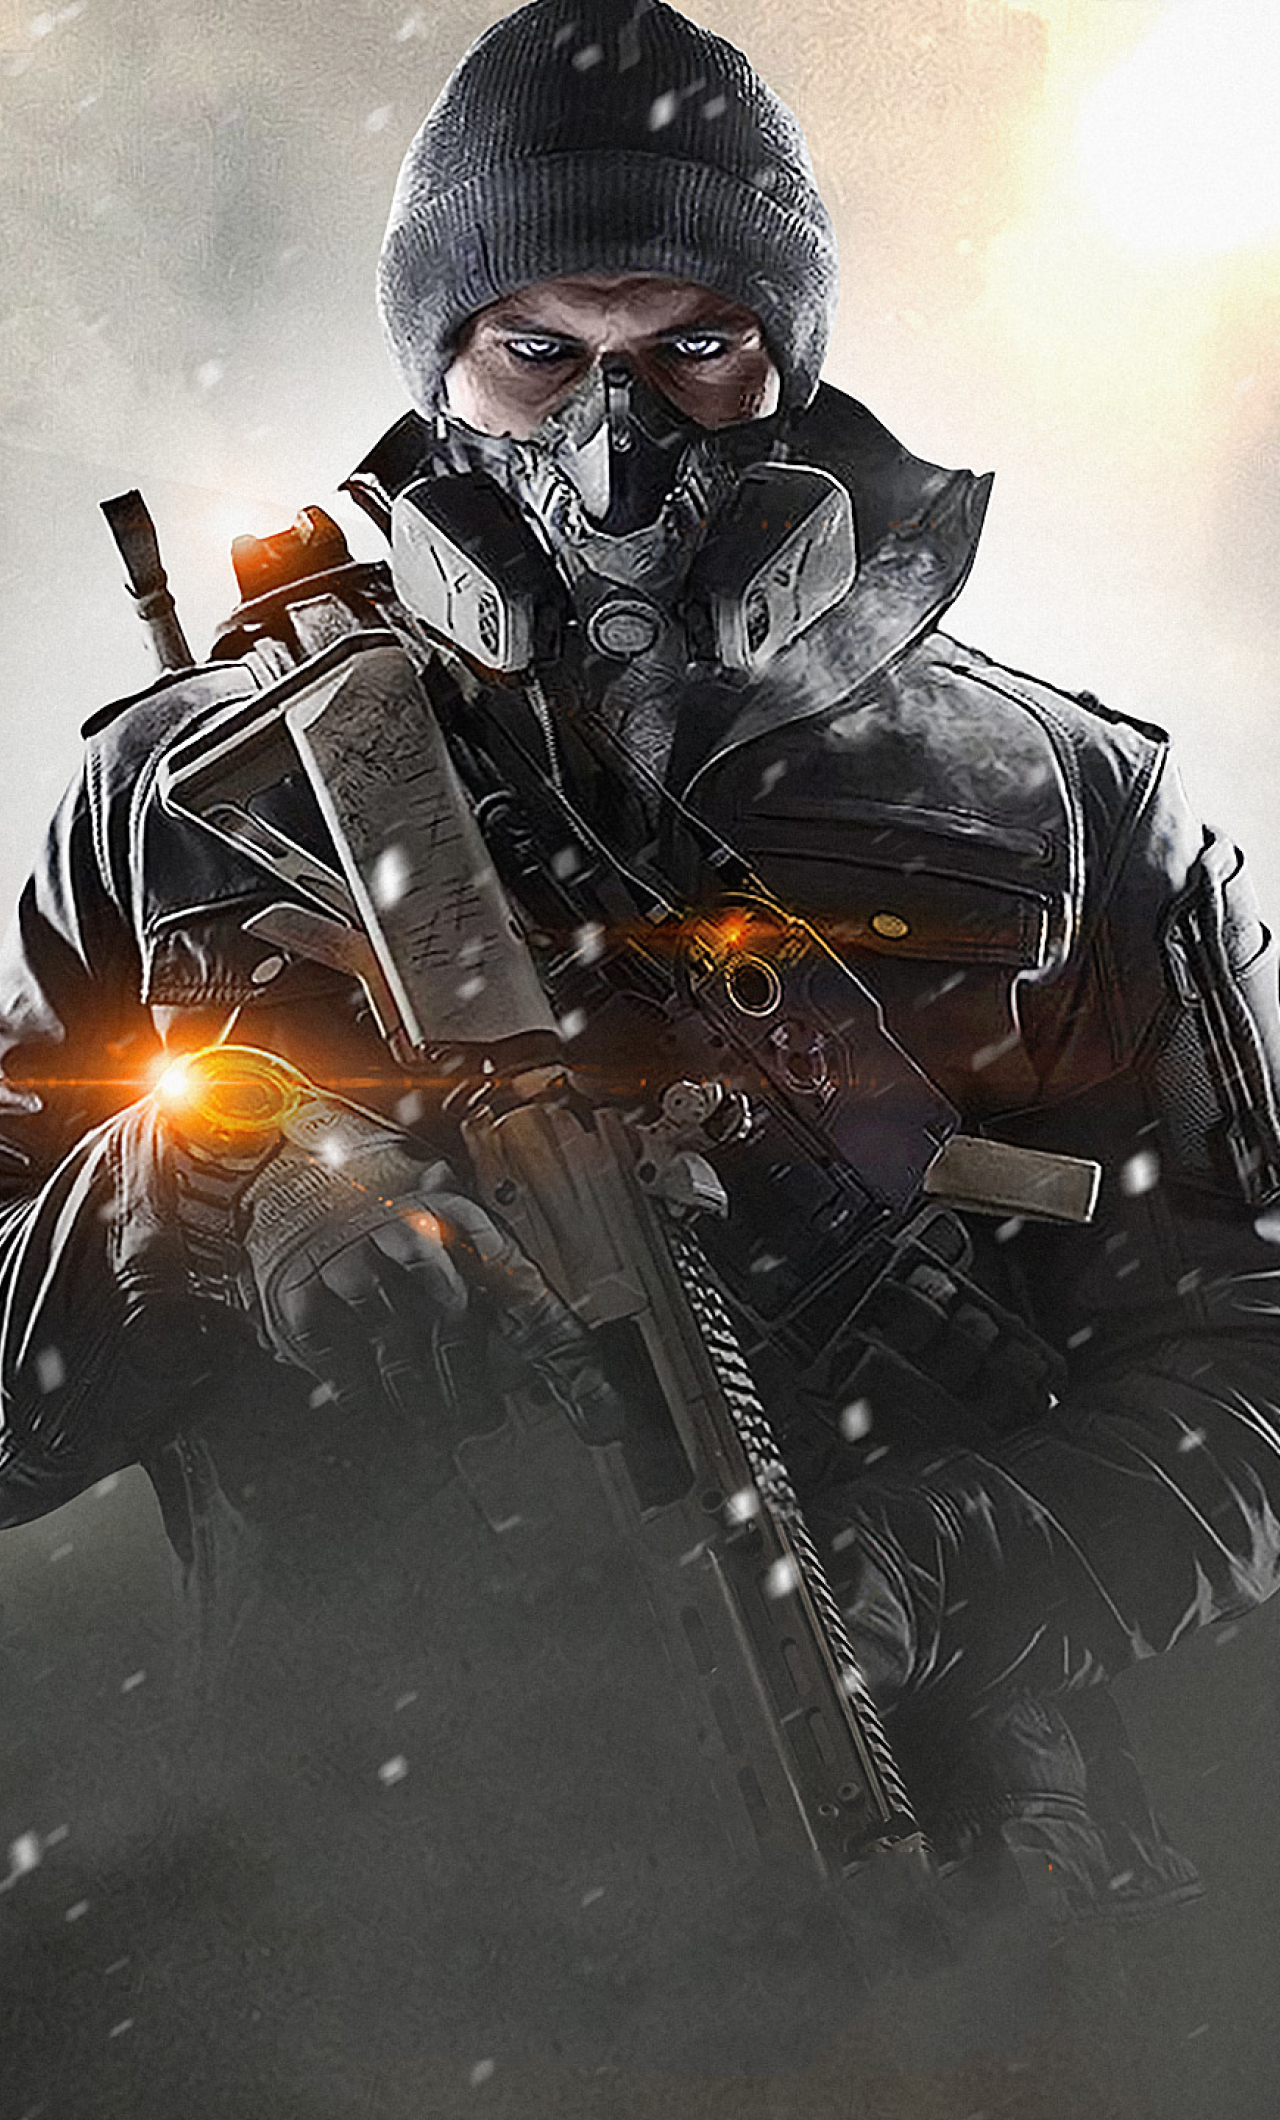 1280x21 Tom Clancy S The Division Iphone 6 Plus Wallpaper Hd Games 4k Wallpapers Images Photos And Background